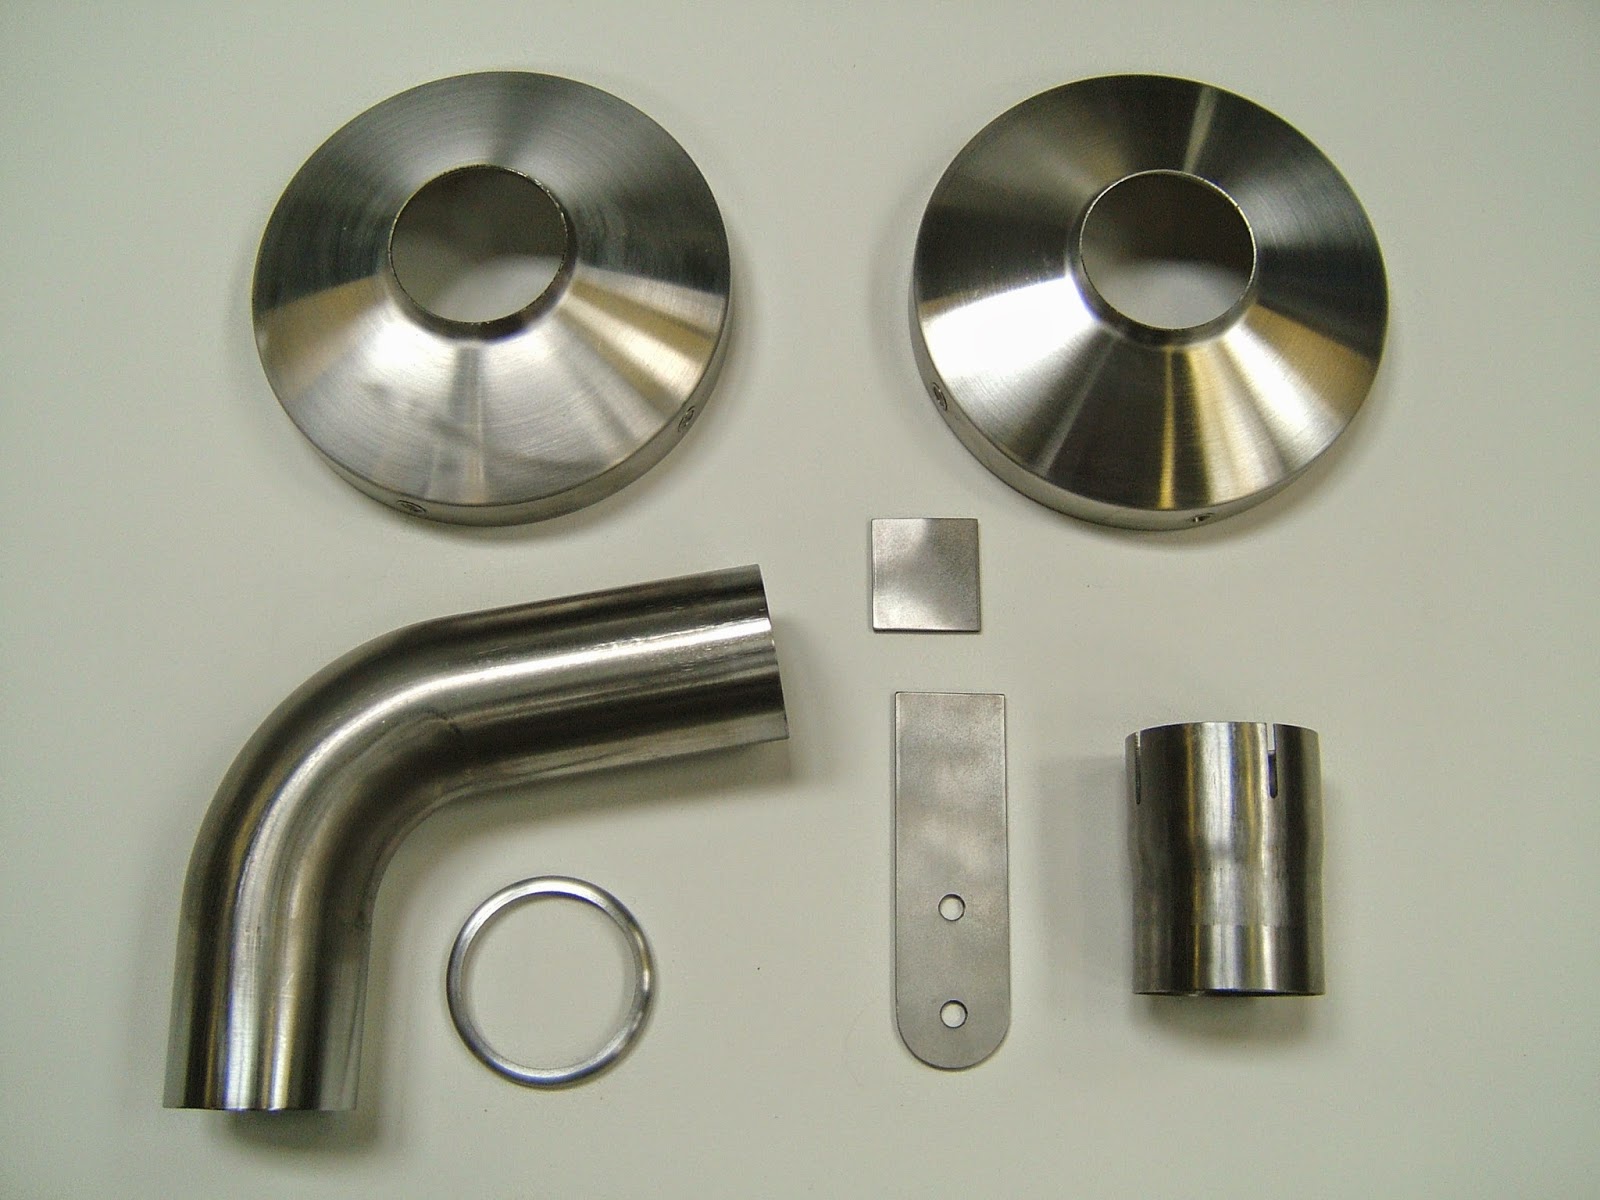 These are the component parts for the inlet and exhaust cap.